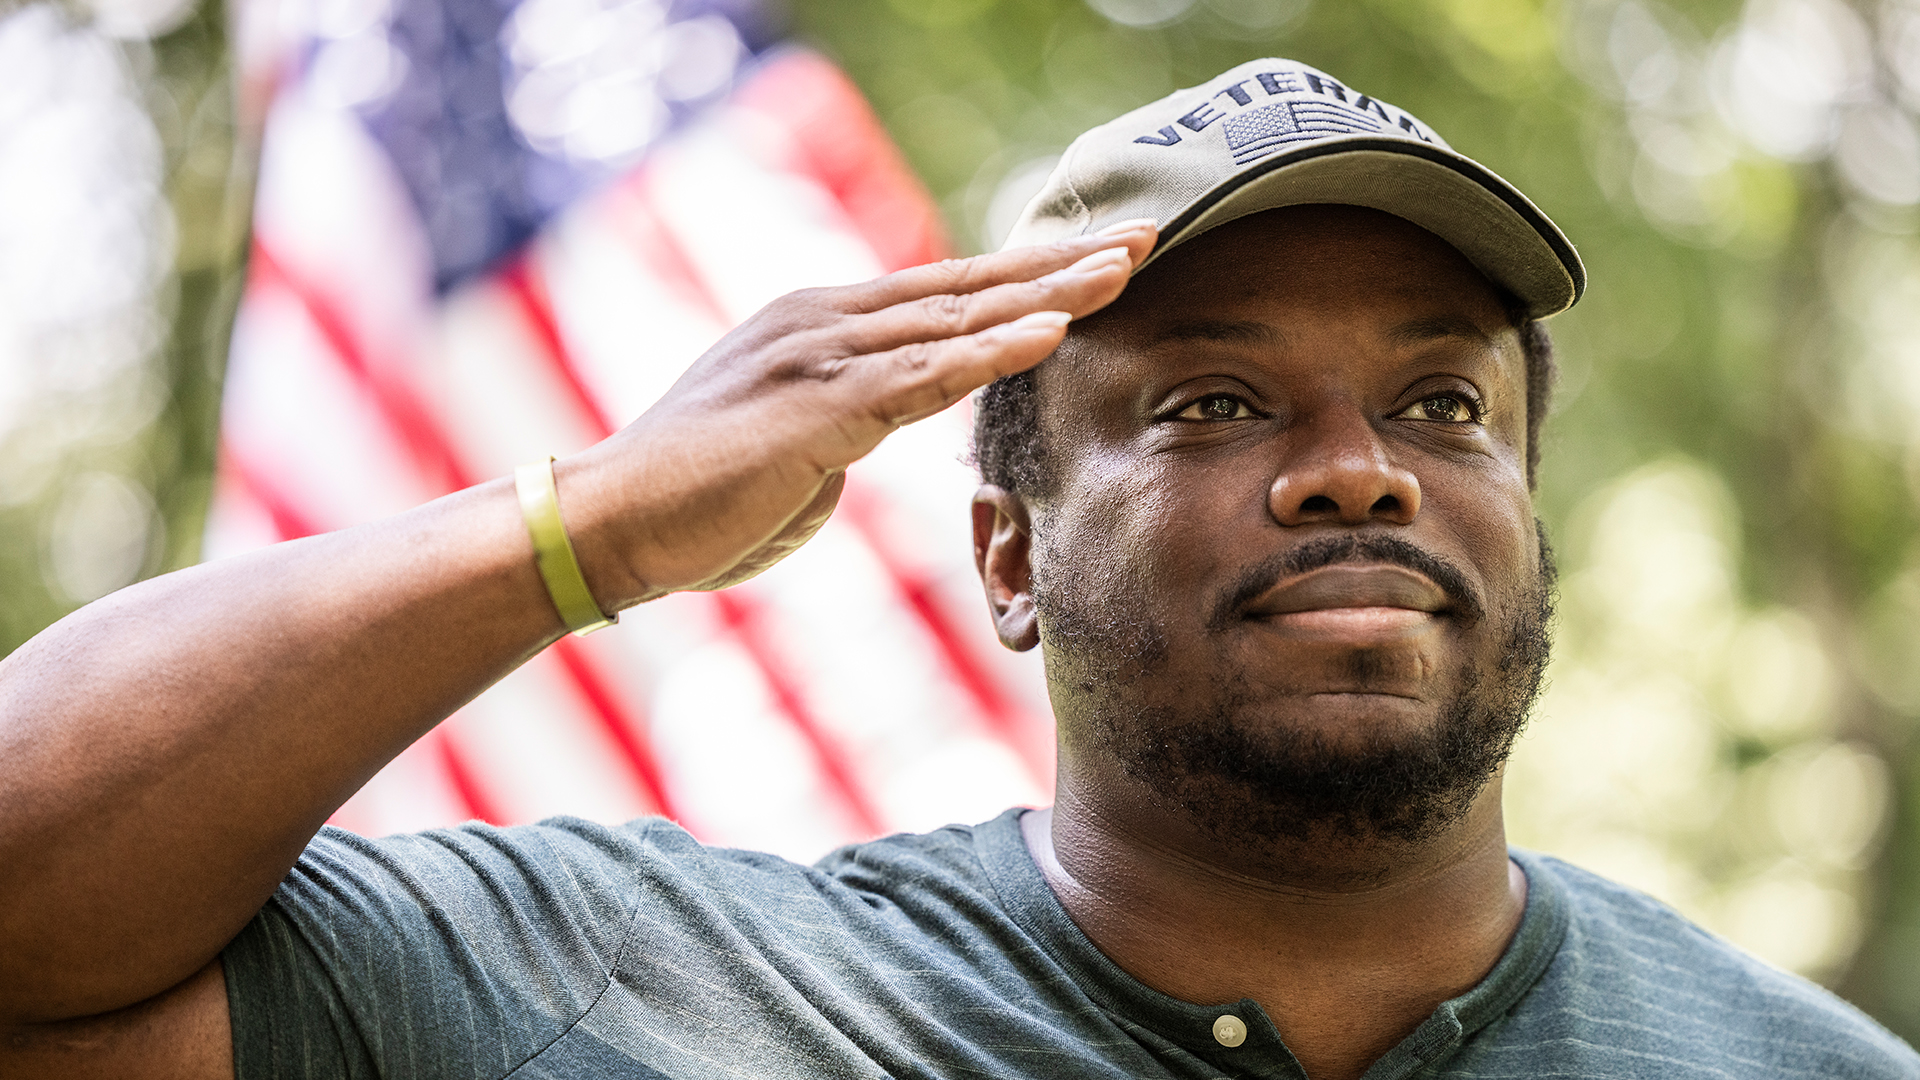 Veteran giving a salute in front of the American flag